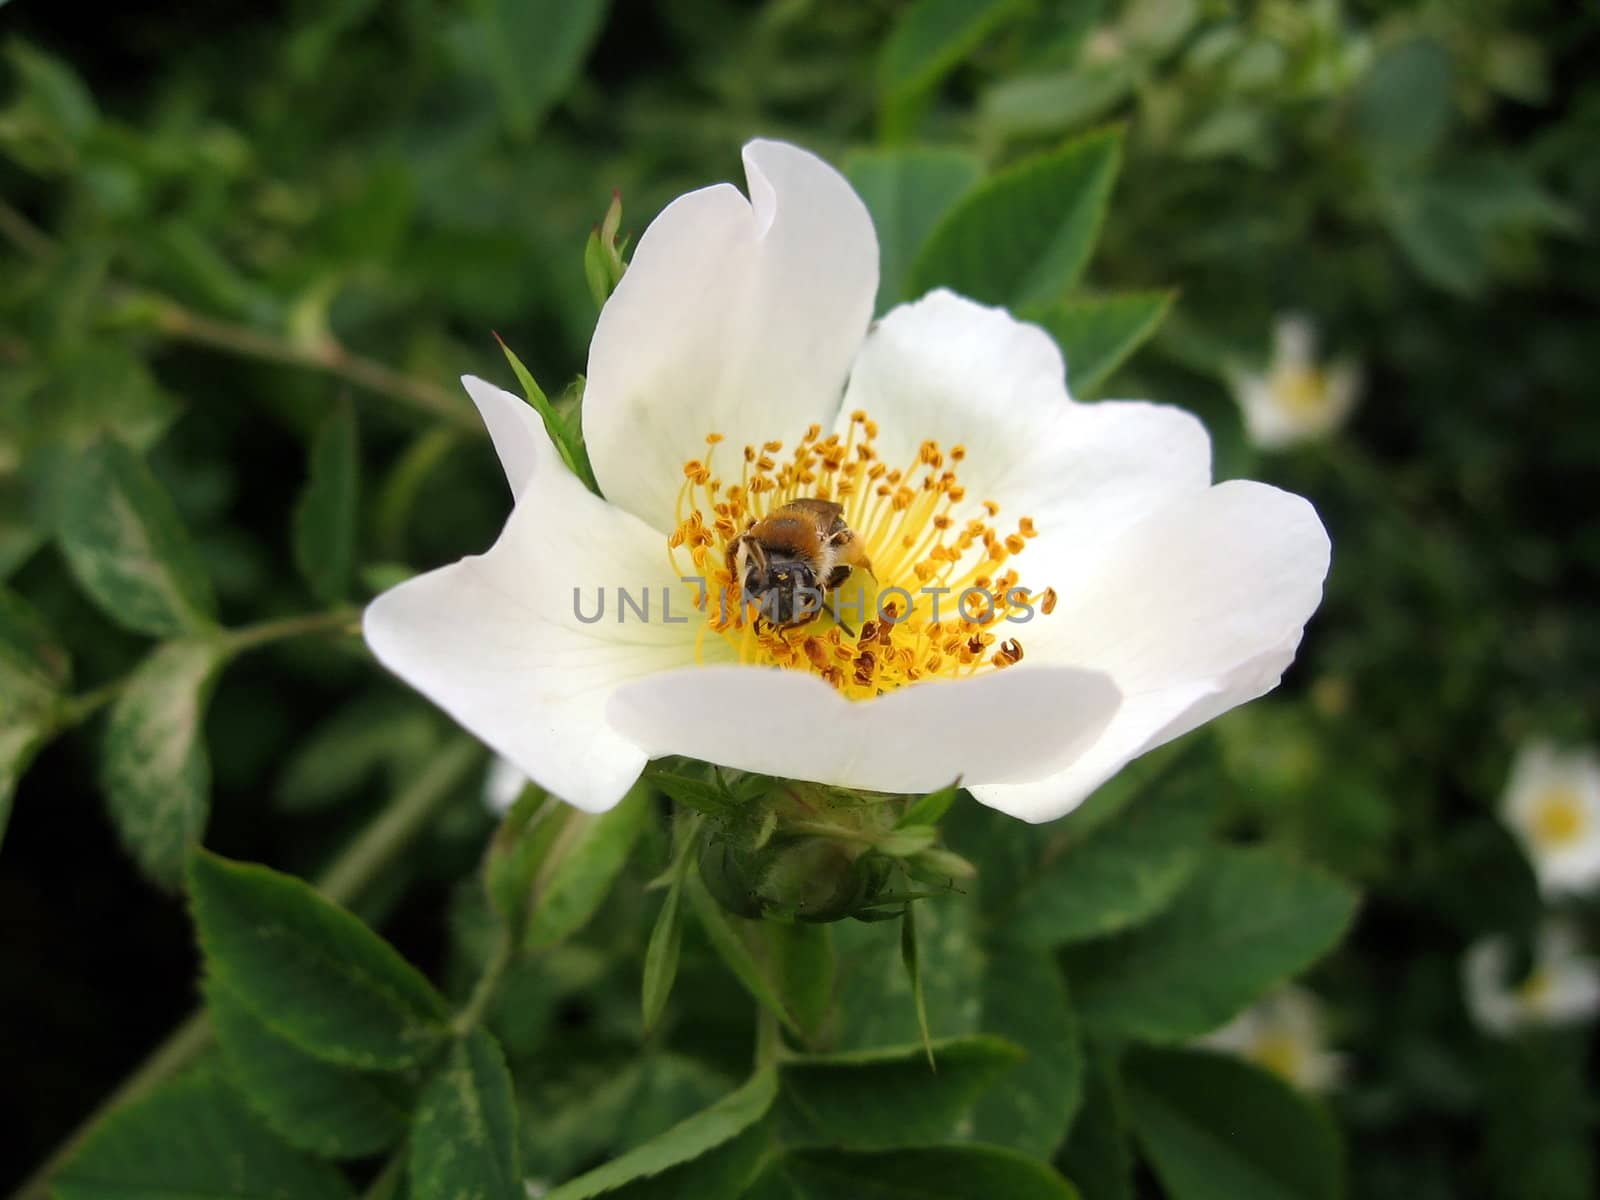 Bee on white briar flower by tomatto